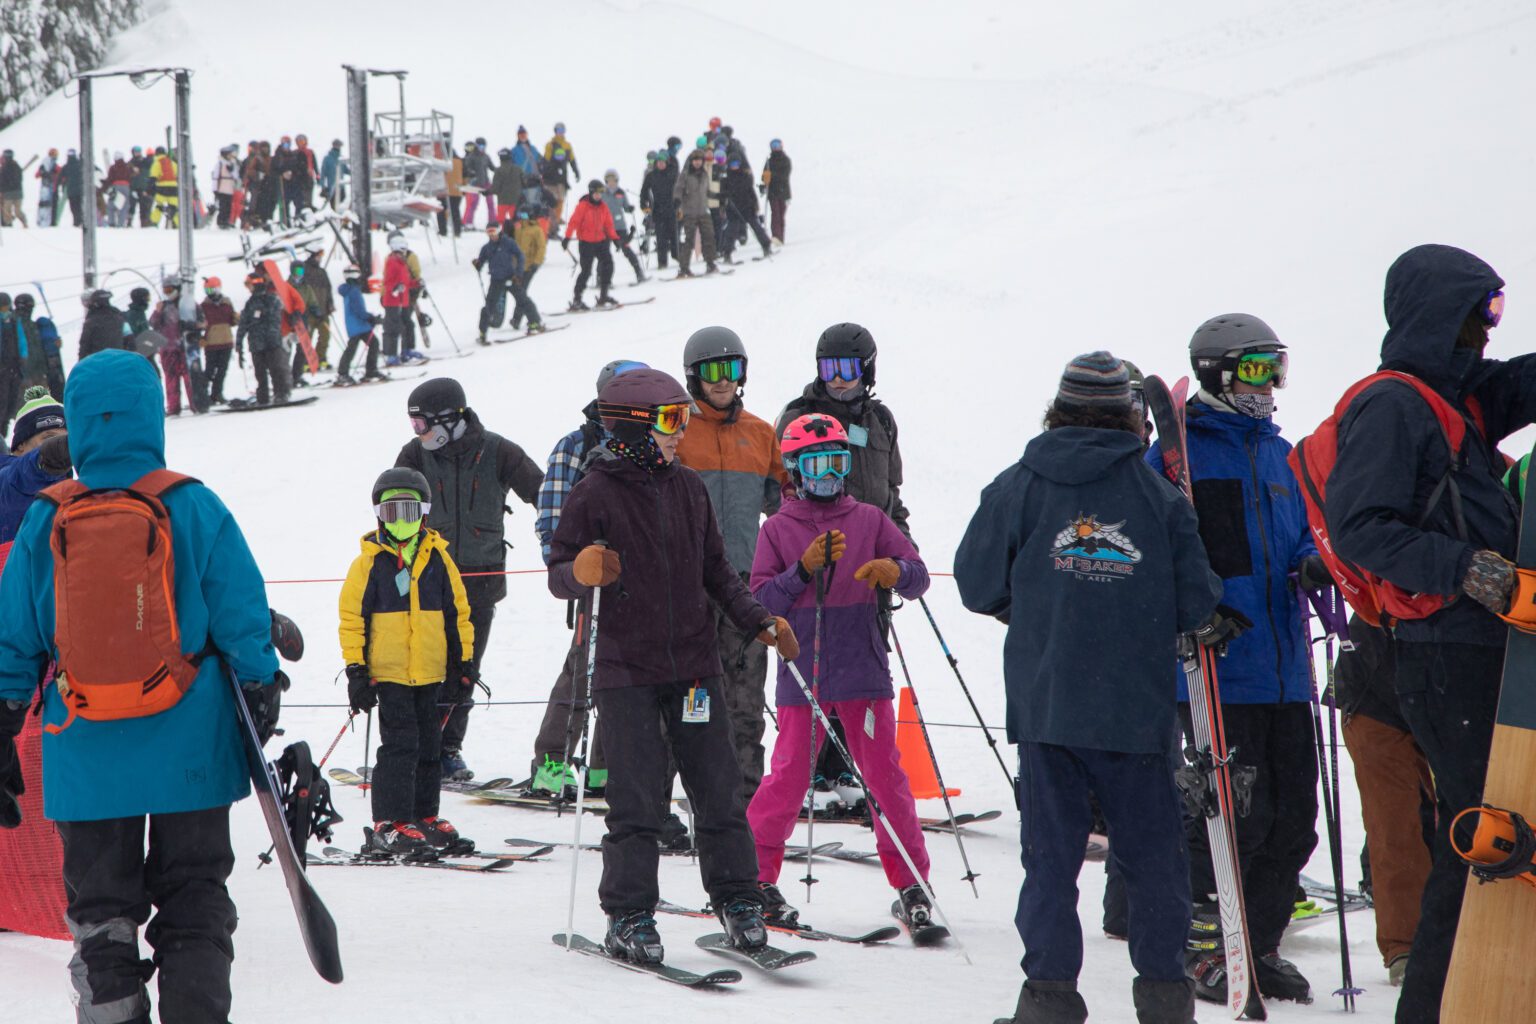 Dozens of people line up with their snowboards and skis dressed in a multitude of colored winter gear and visors.